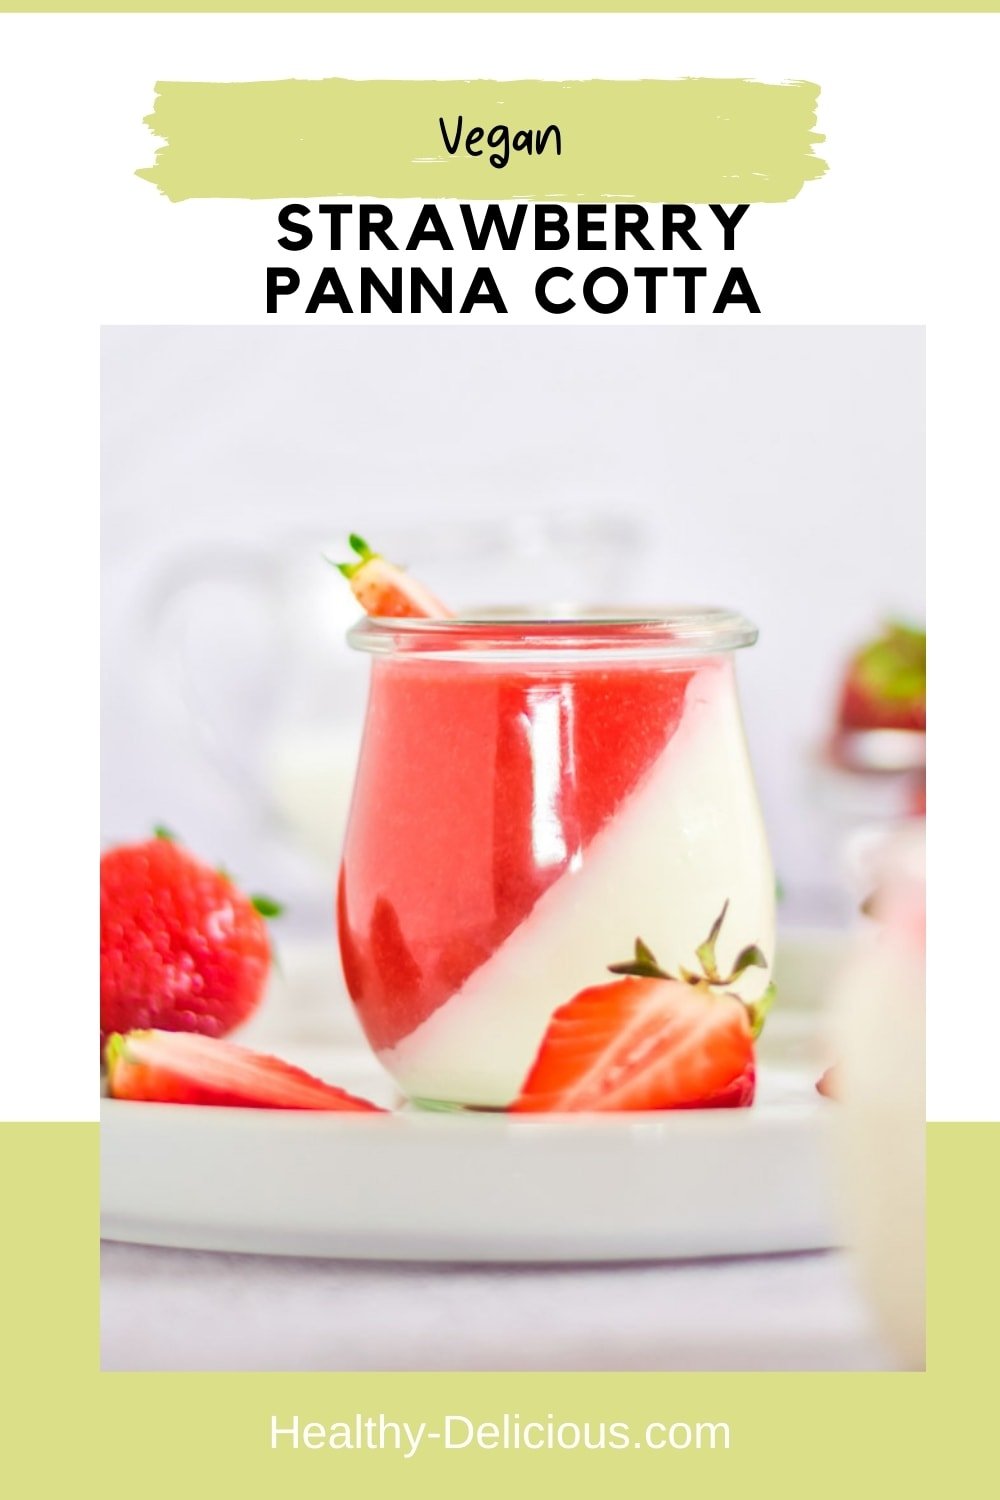 This luscious vegan panna cotta is topped with fresh strawberry sauce for a delicious dessert that adults and kids alike will gobble up! Impressive enough to serve at a dinner party, it's made with just 5 ingredients and a few minutes of active prep time. Vegan, Dairy Free, and Sugar Free! via @HealthyDelish